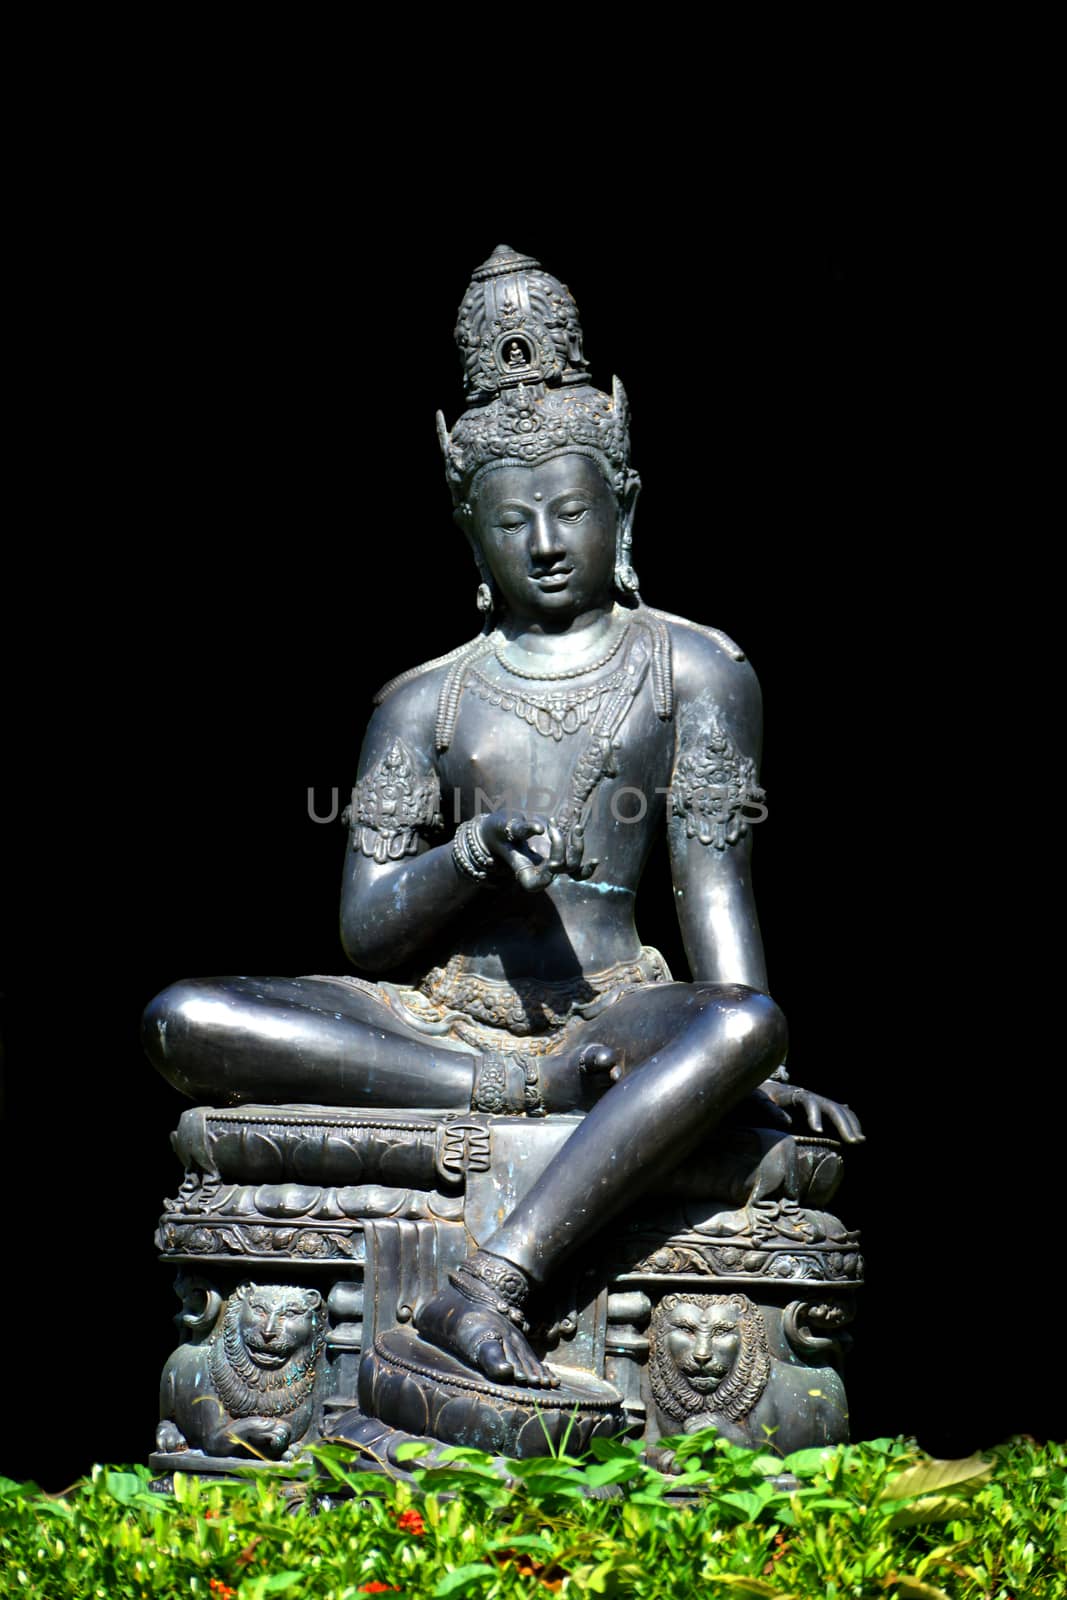 The Bodhisattva statue metal. In place of Dharma.